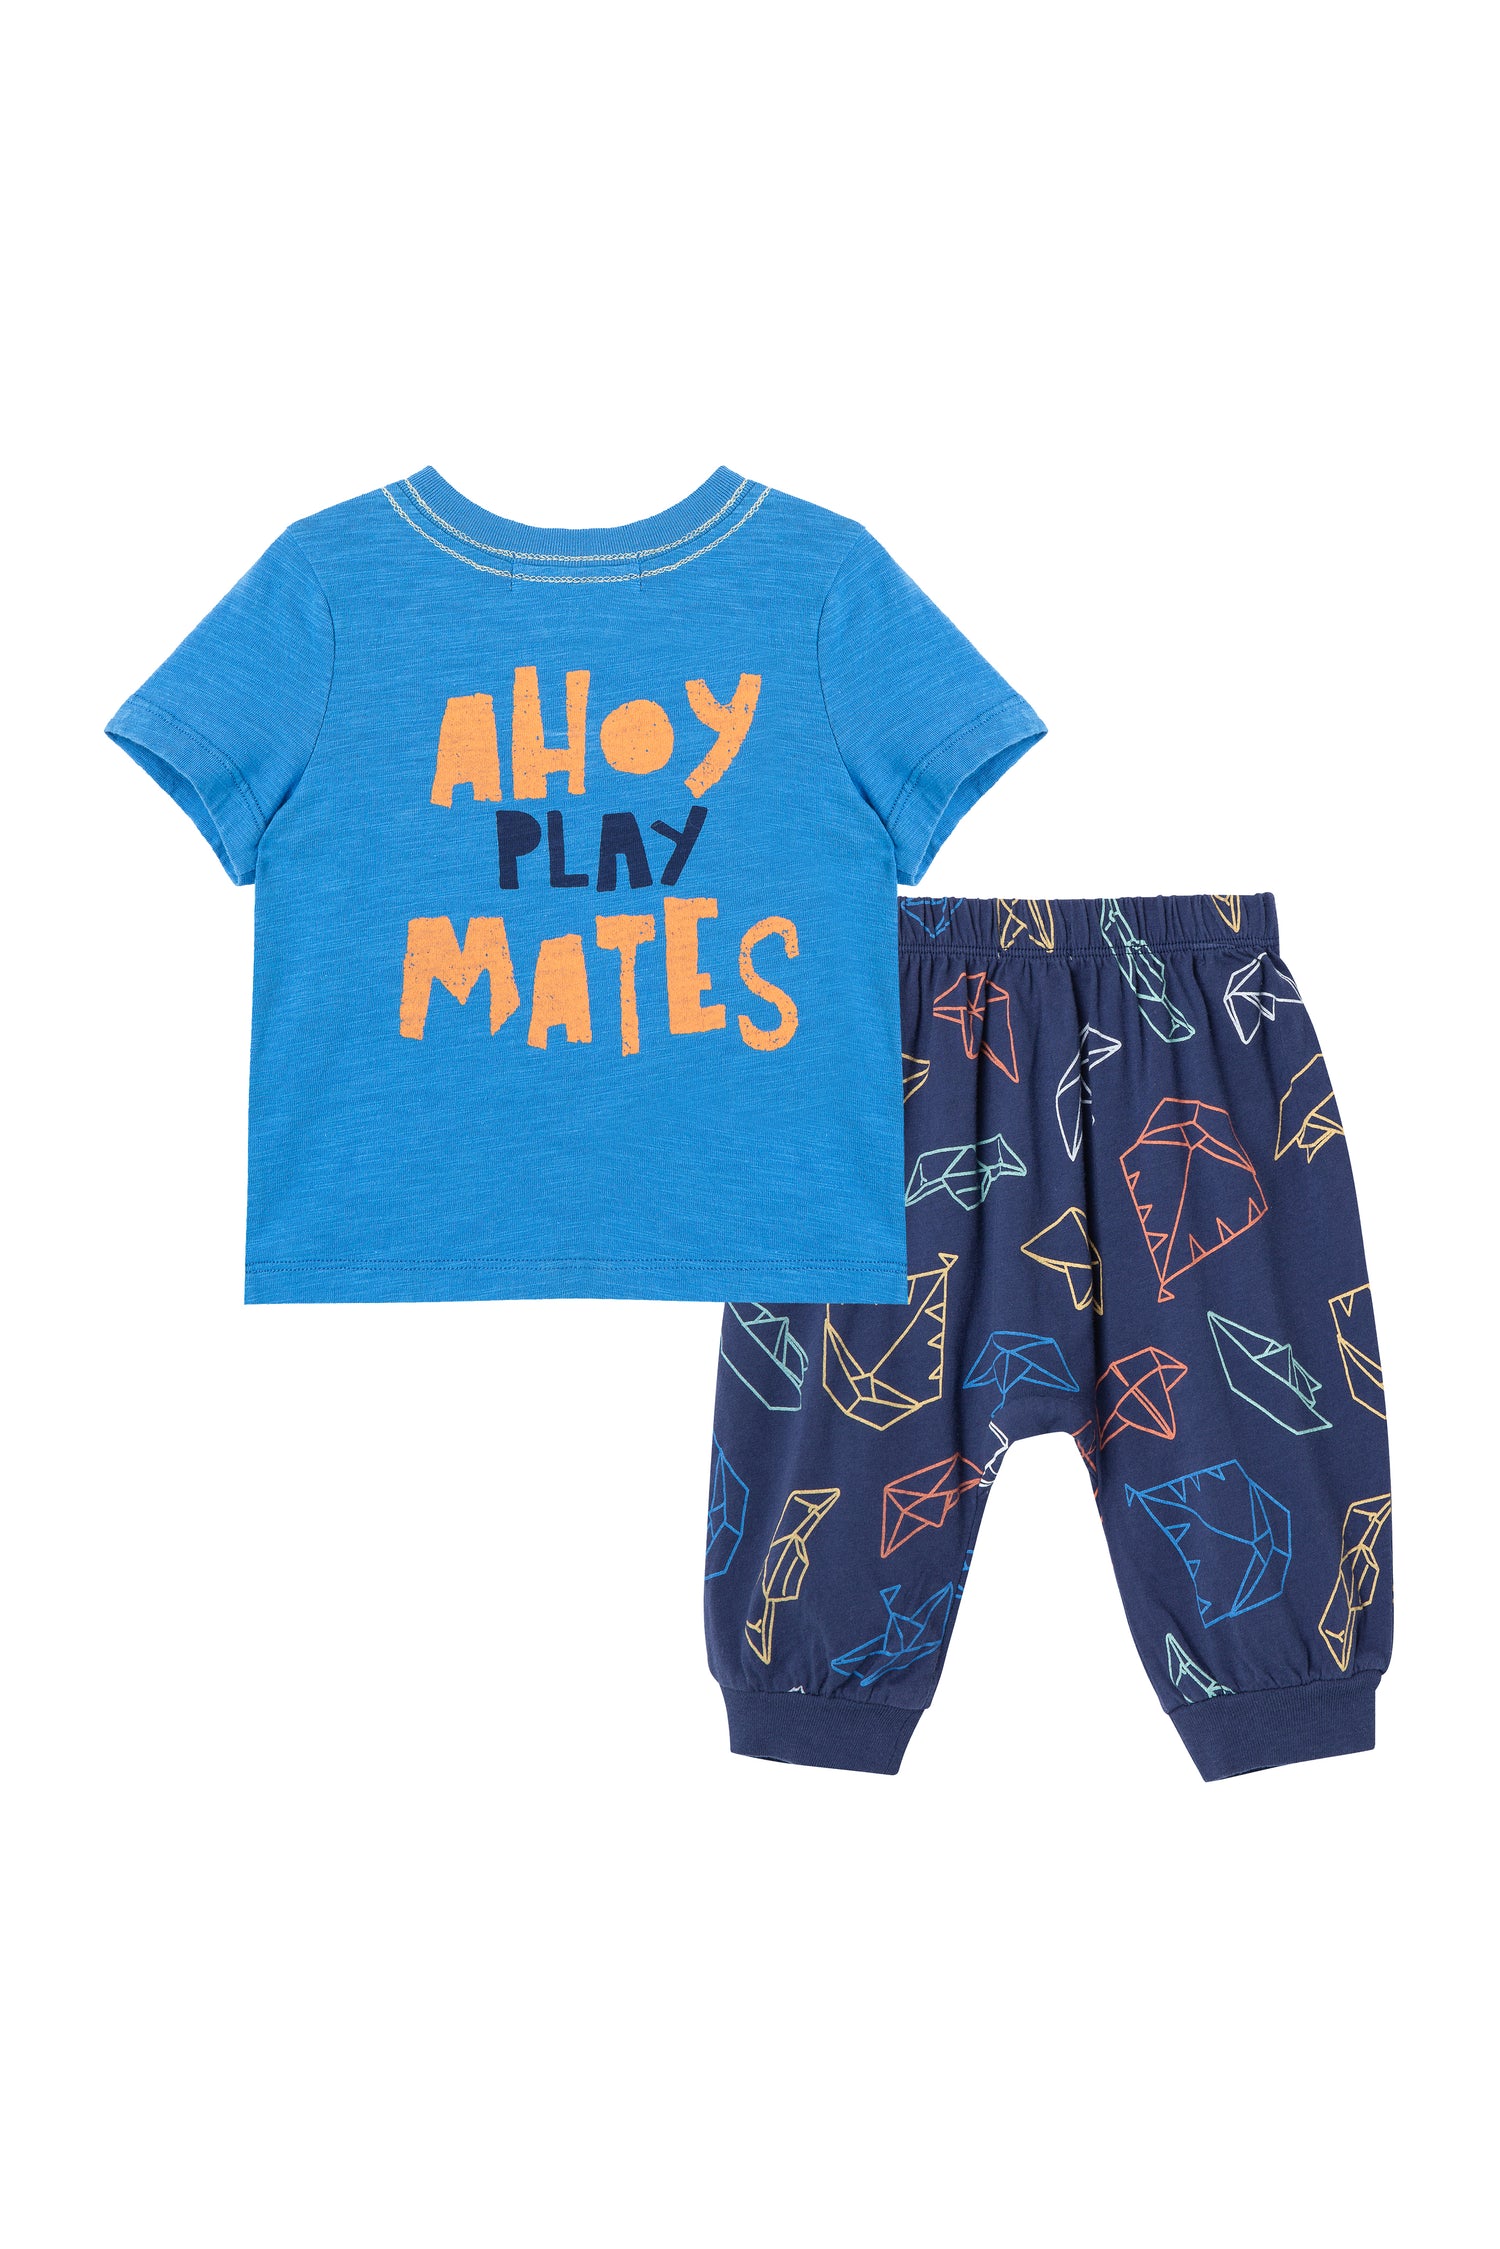 Front view of Blue pirate pant and shirt set with "ahoy play mates" wording on shirt 